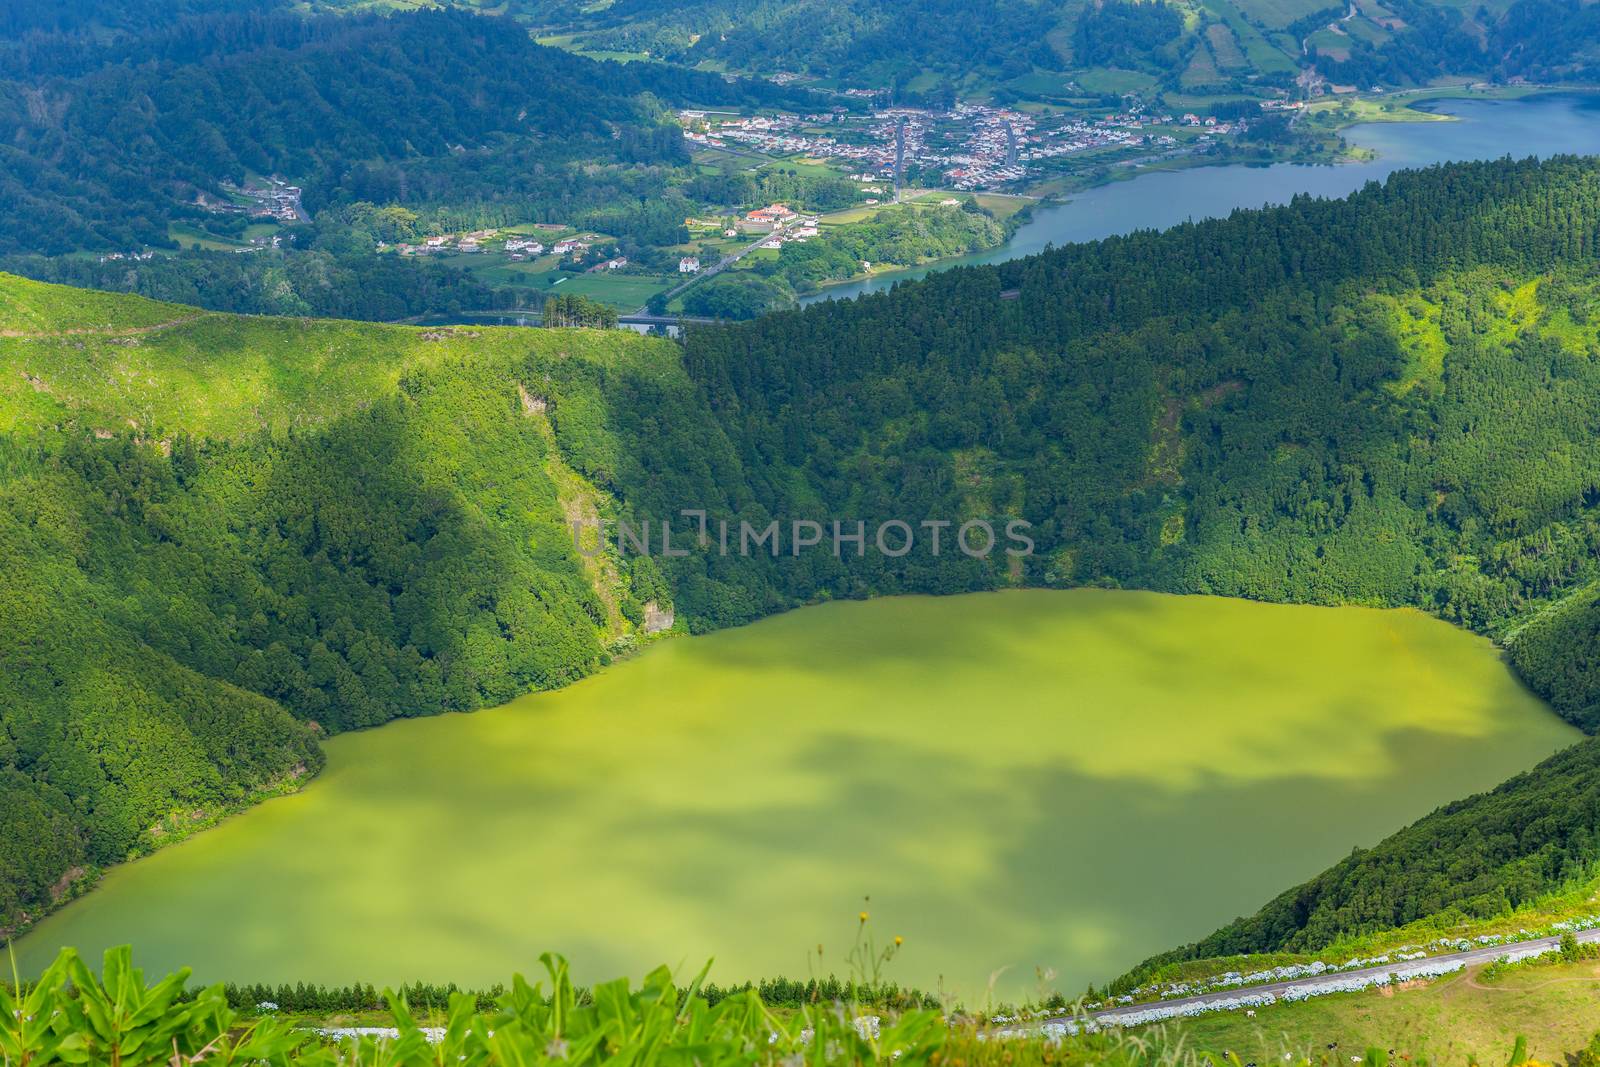 Lake of Sete Cidades, a volcanic crater lake on Sao Miguel island, Azores, Portugal. View from Boca do Inferno